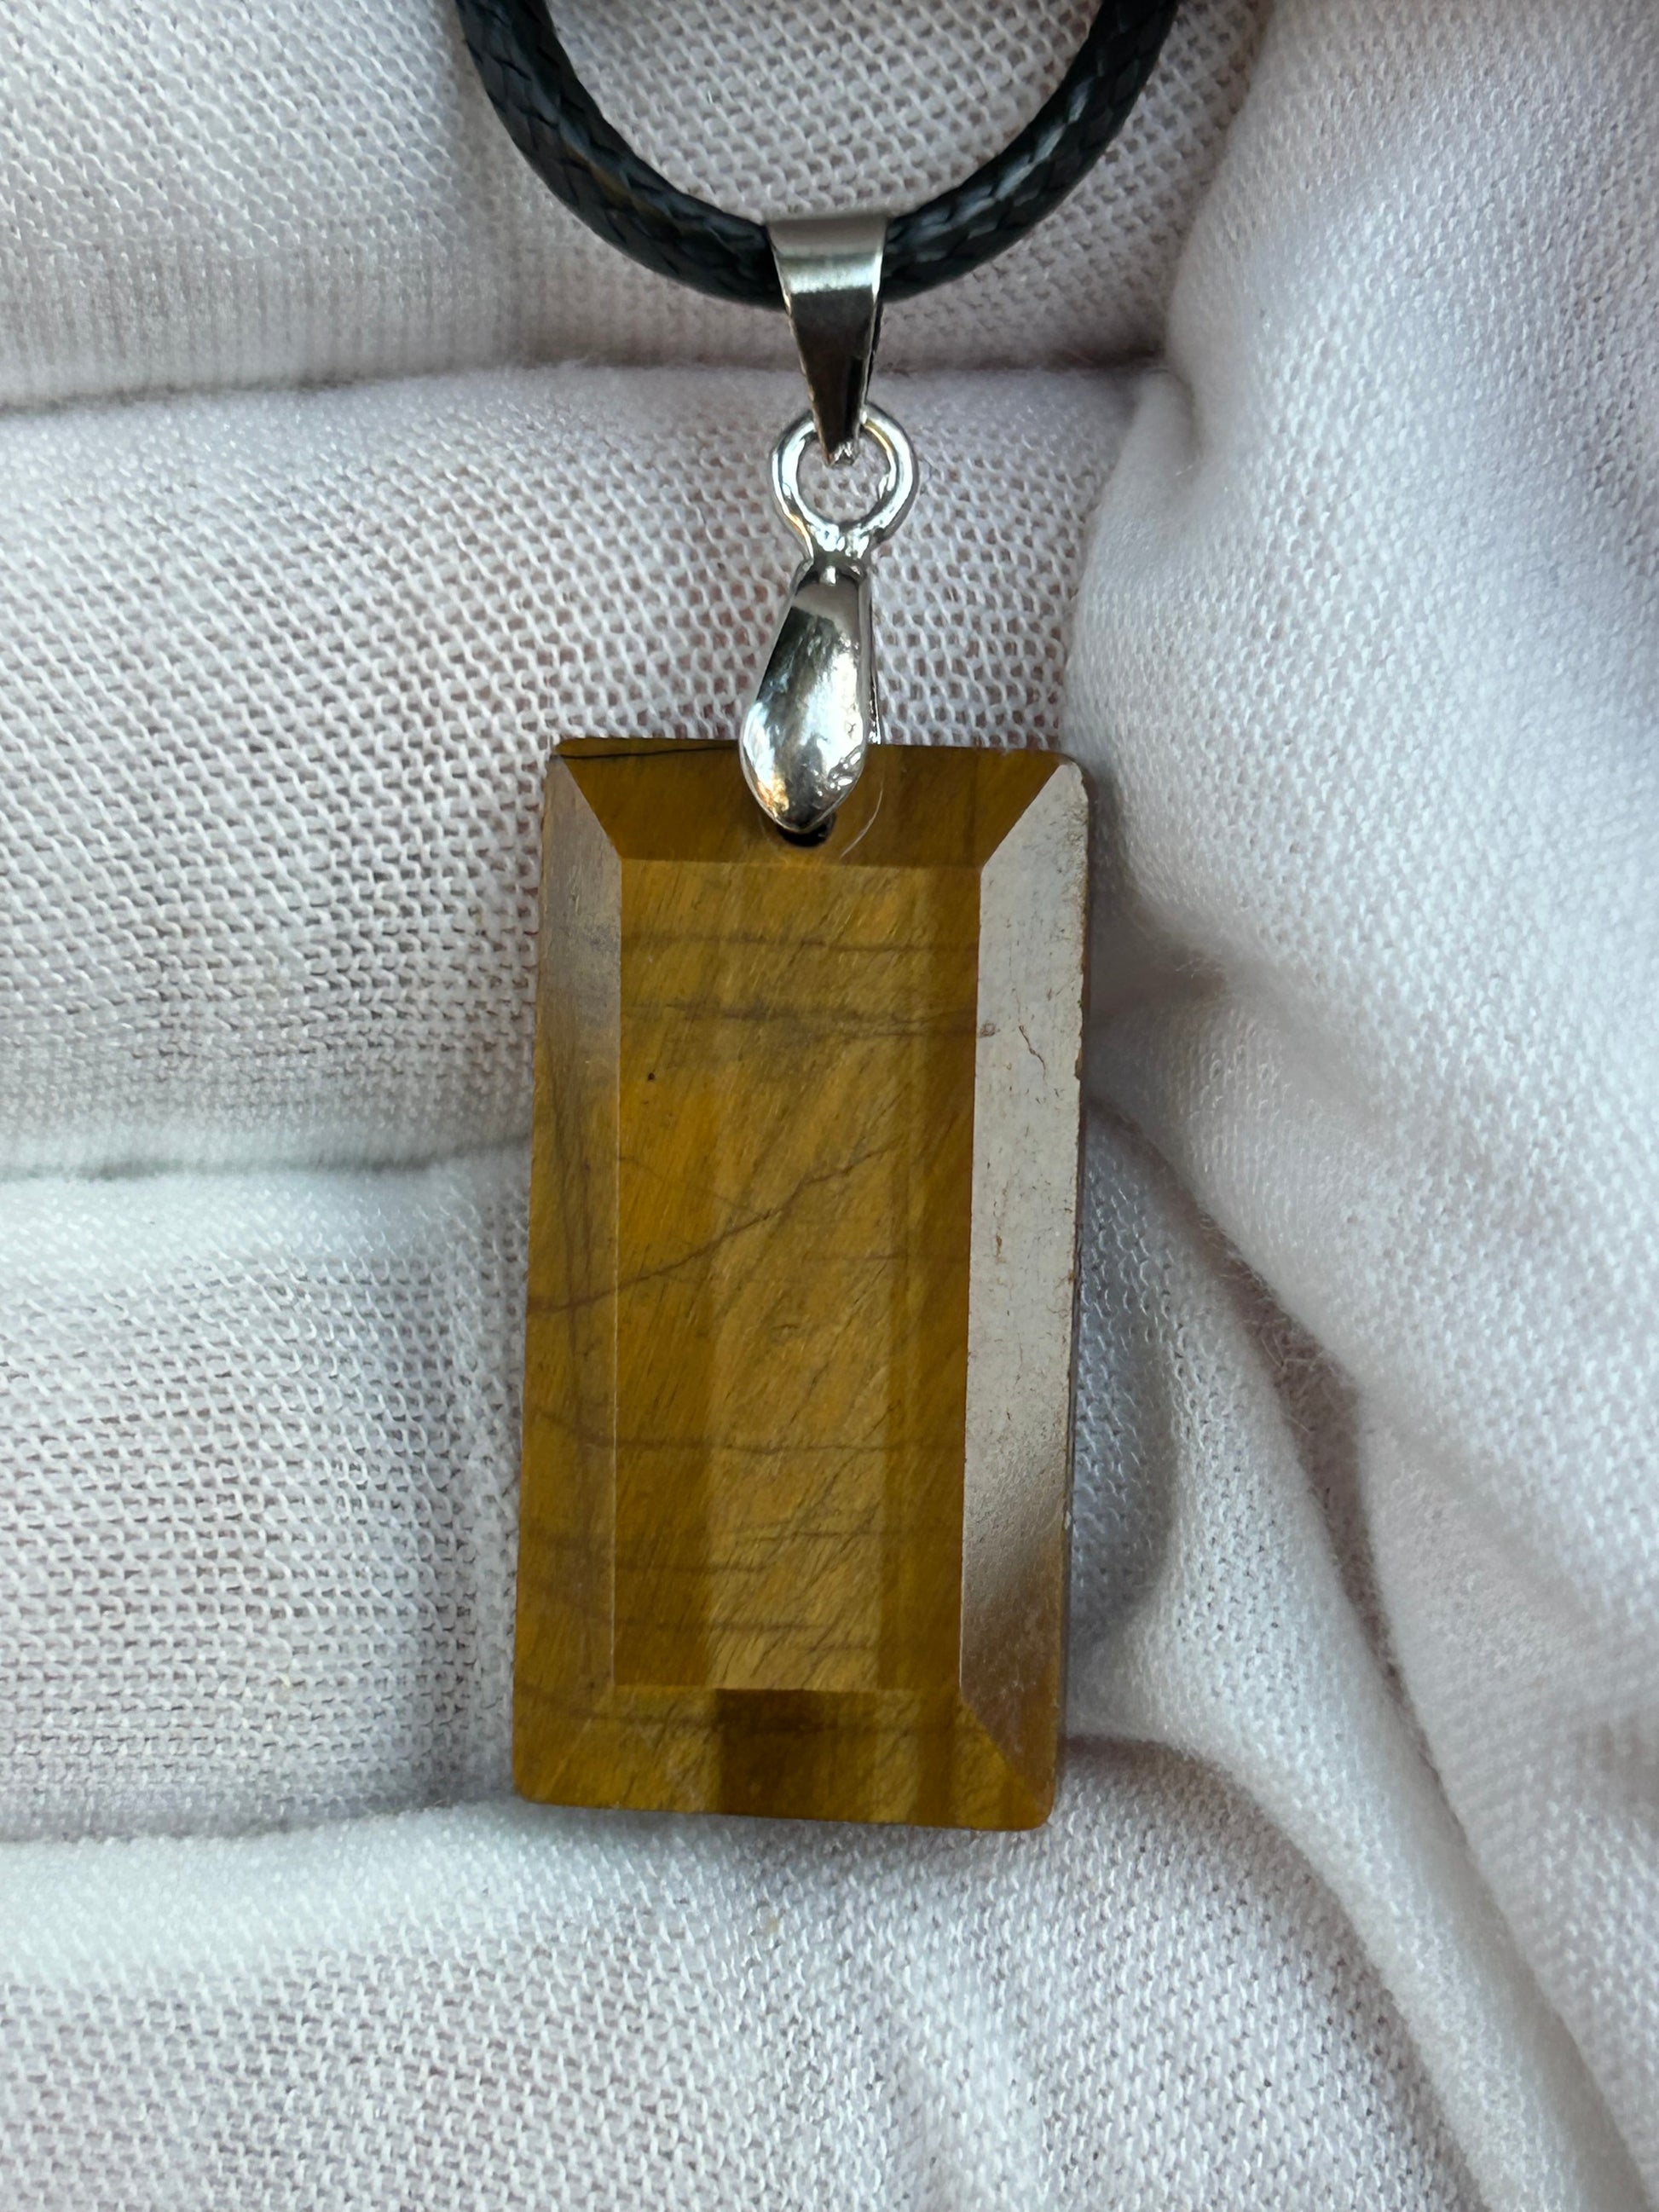 Tigers eye polished rectangular pendant with silver pendant attachment and black cord necklace